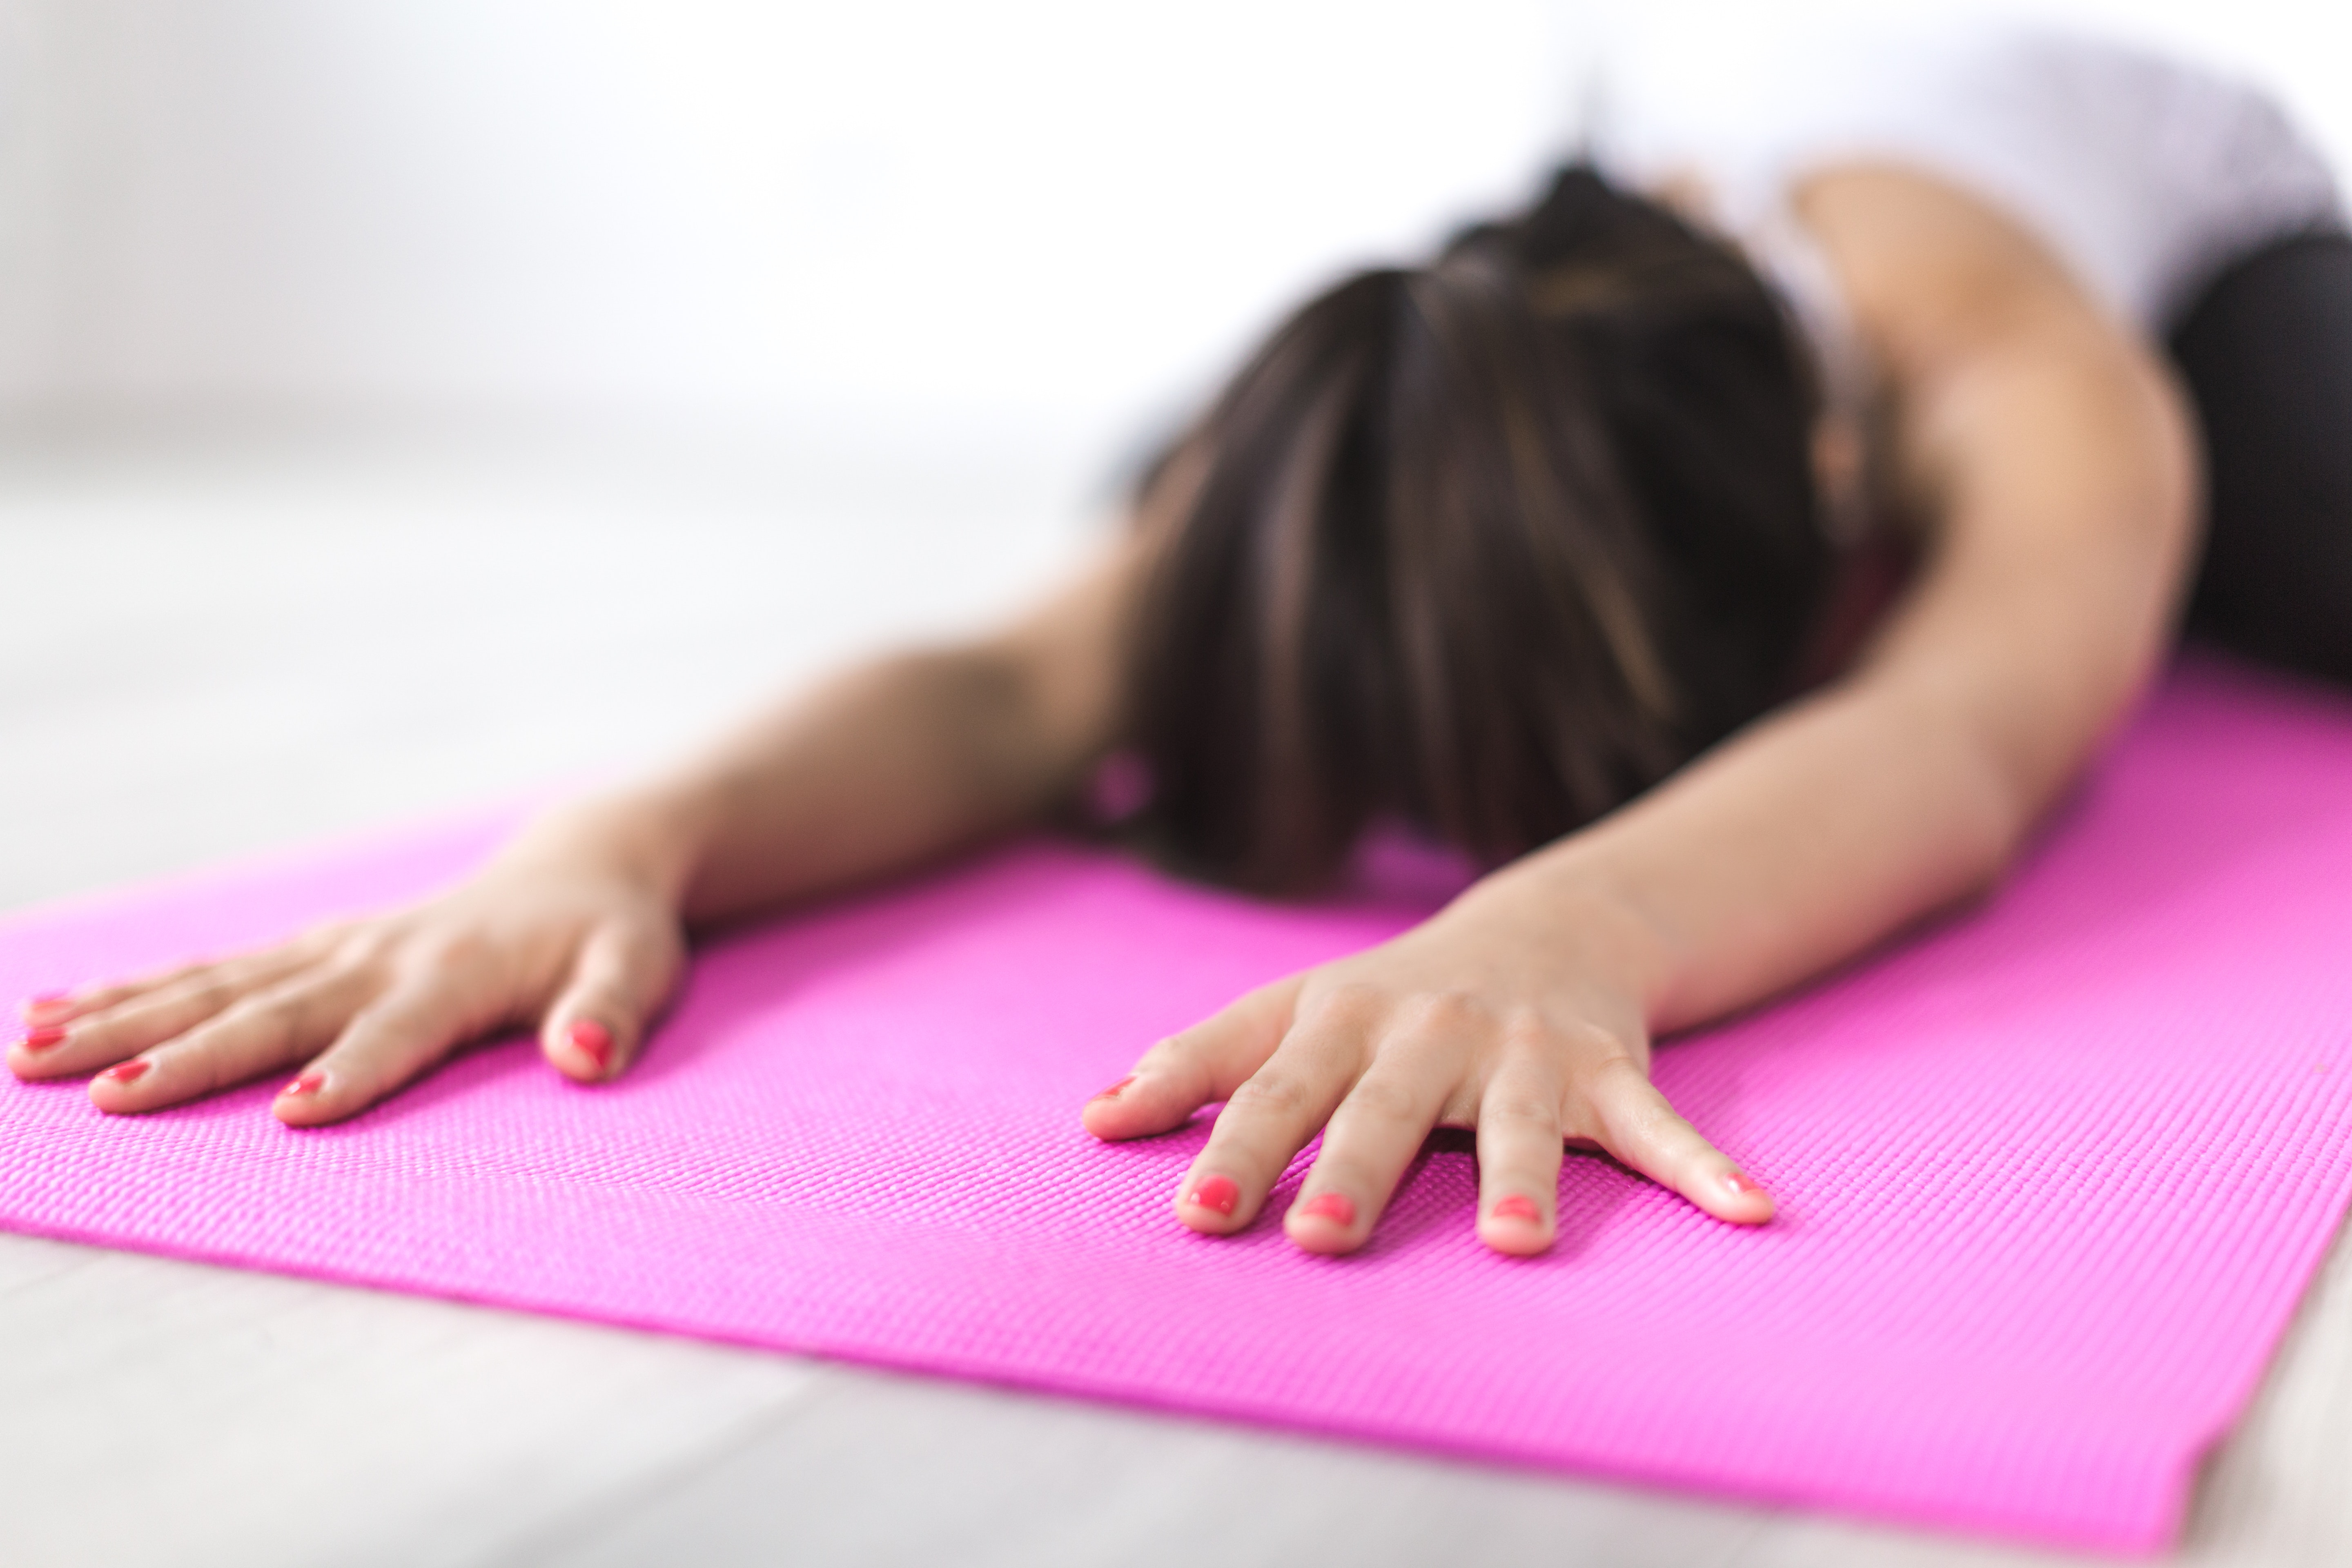 The Do's and Don'ts of Hot Yoga